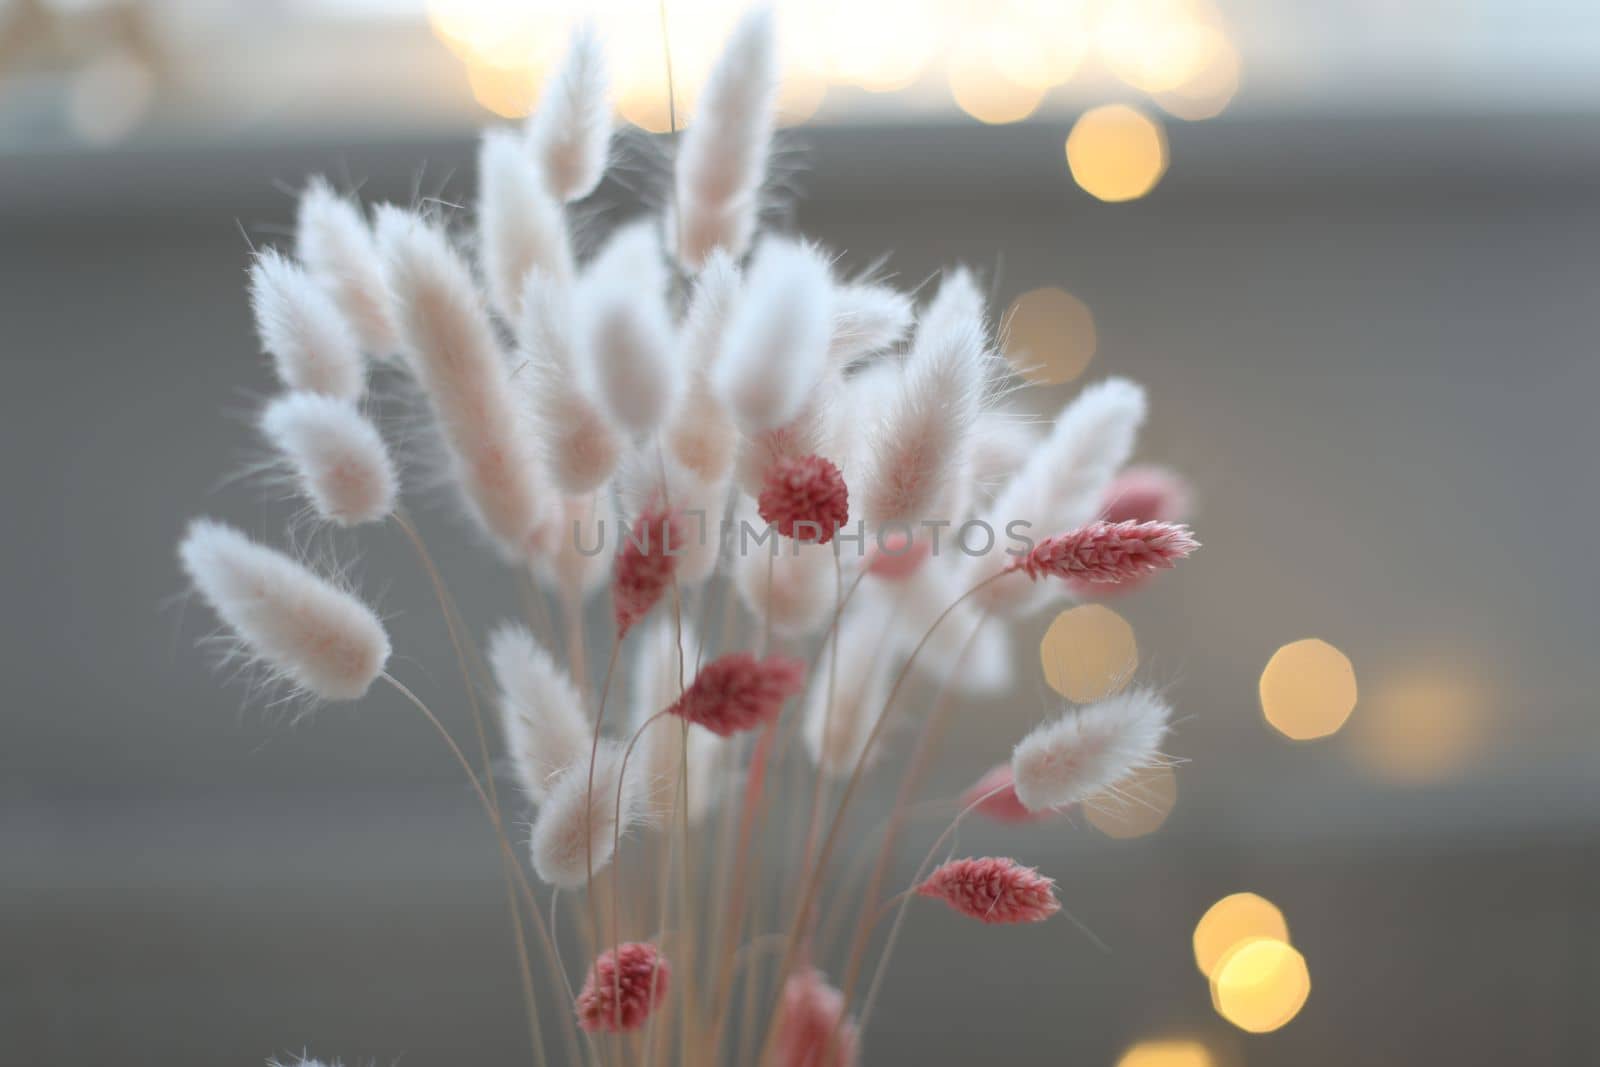 Dry flowers plant floral branch on soft pastel background. Blurred selective focus. Pattern with neutral natural colors